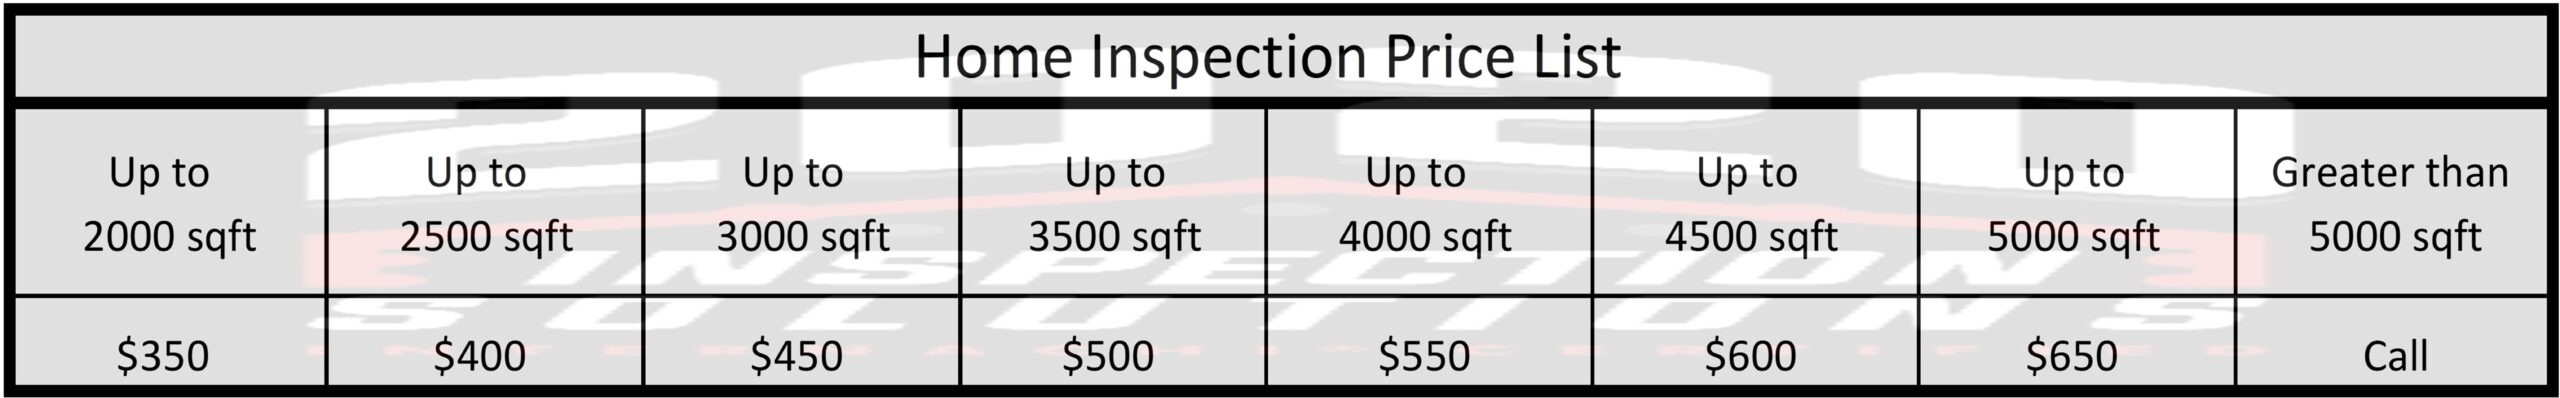 Home Inspection Price